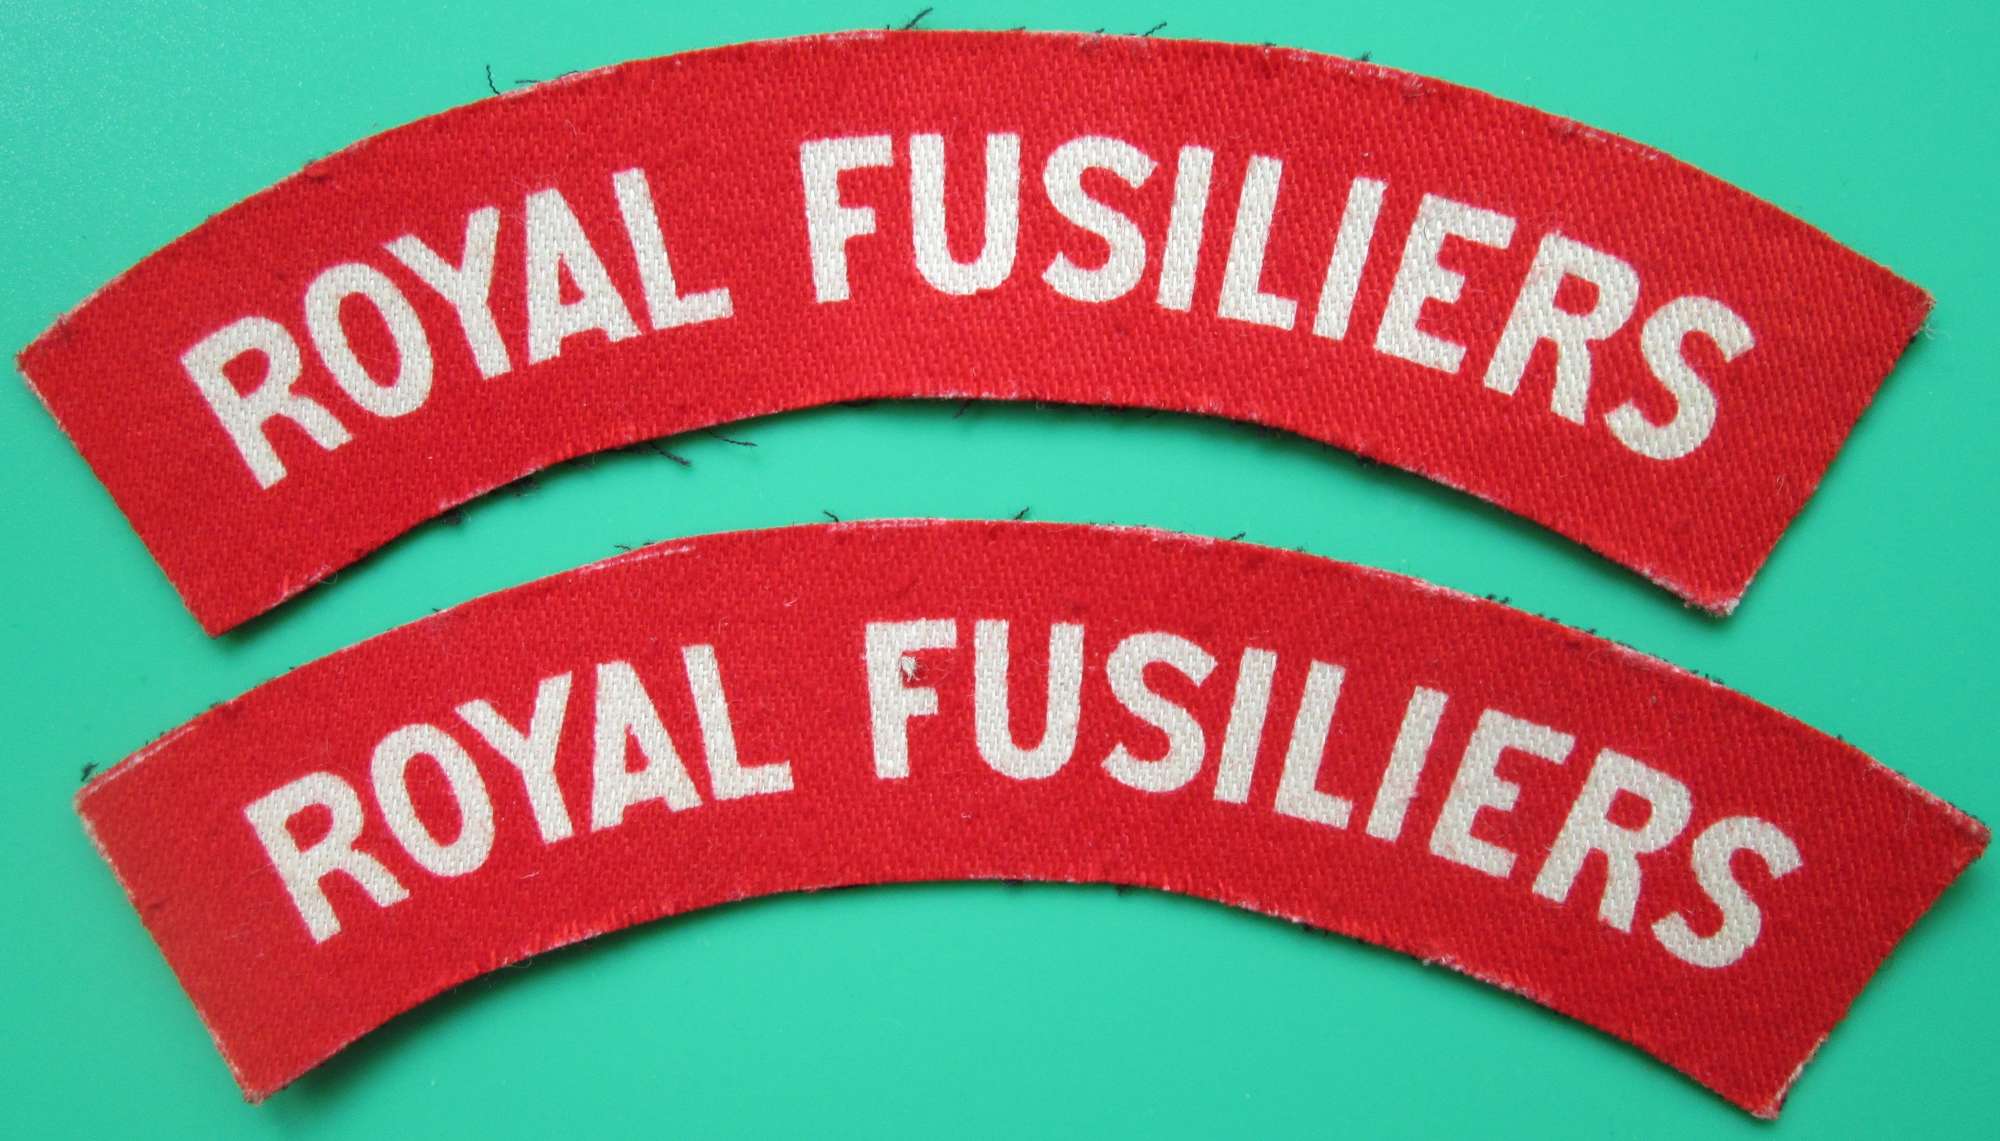 A PAIR OF ROYAL FUSILIERS SHOULDER TITLES